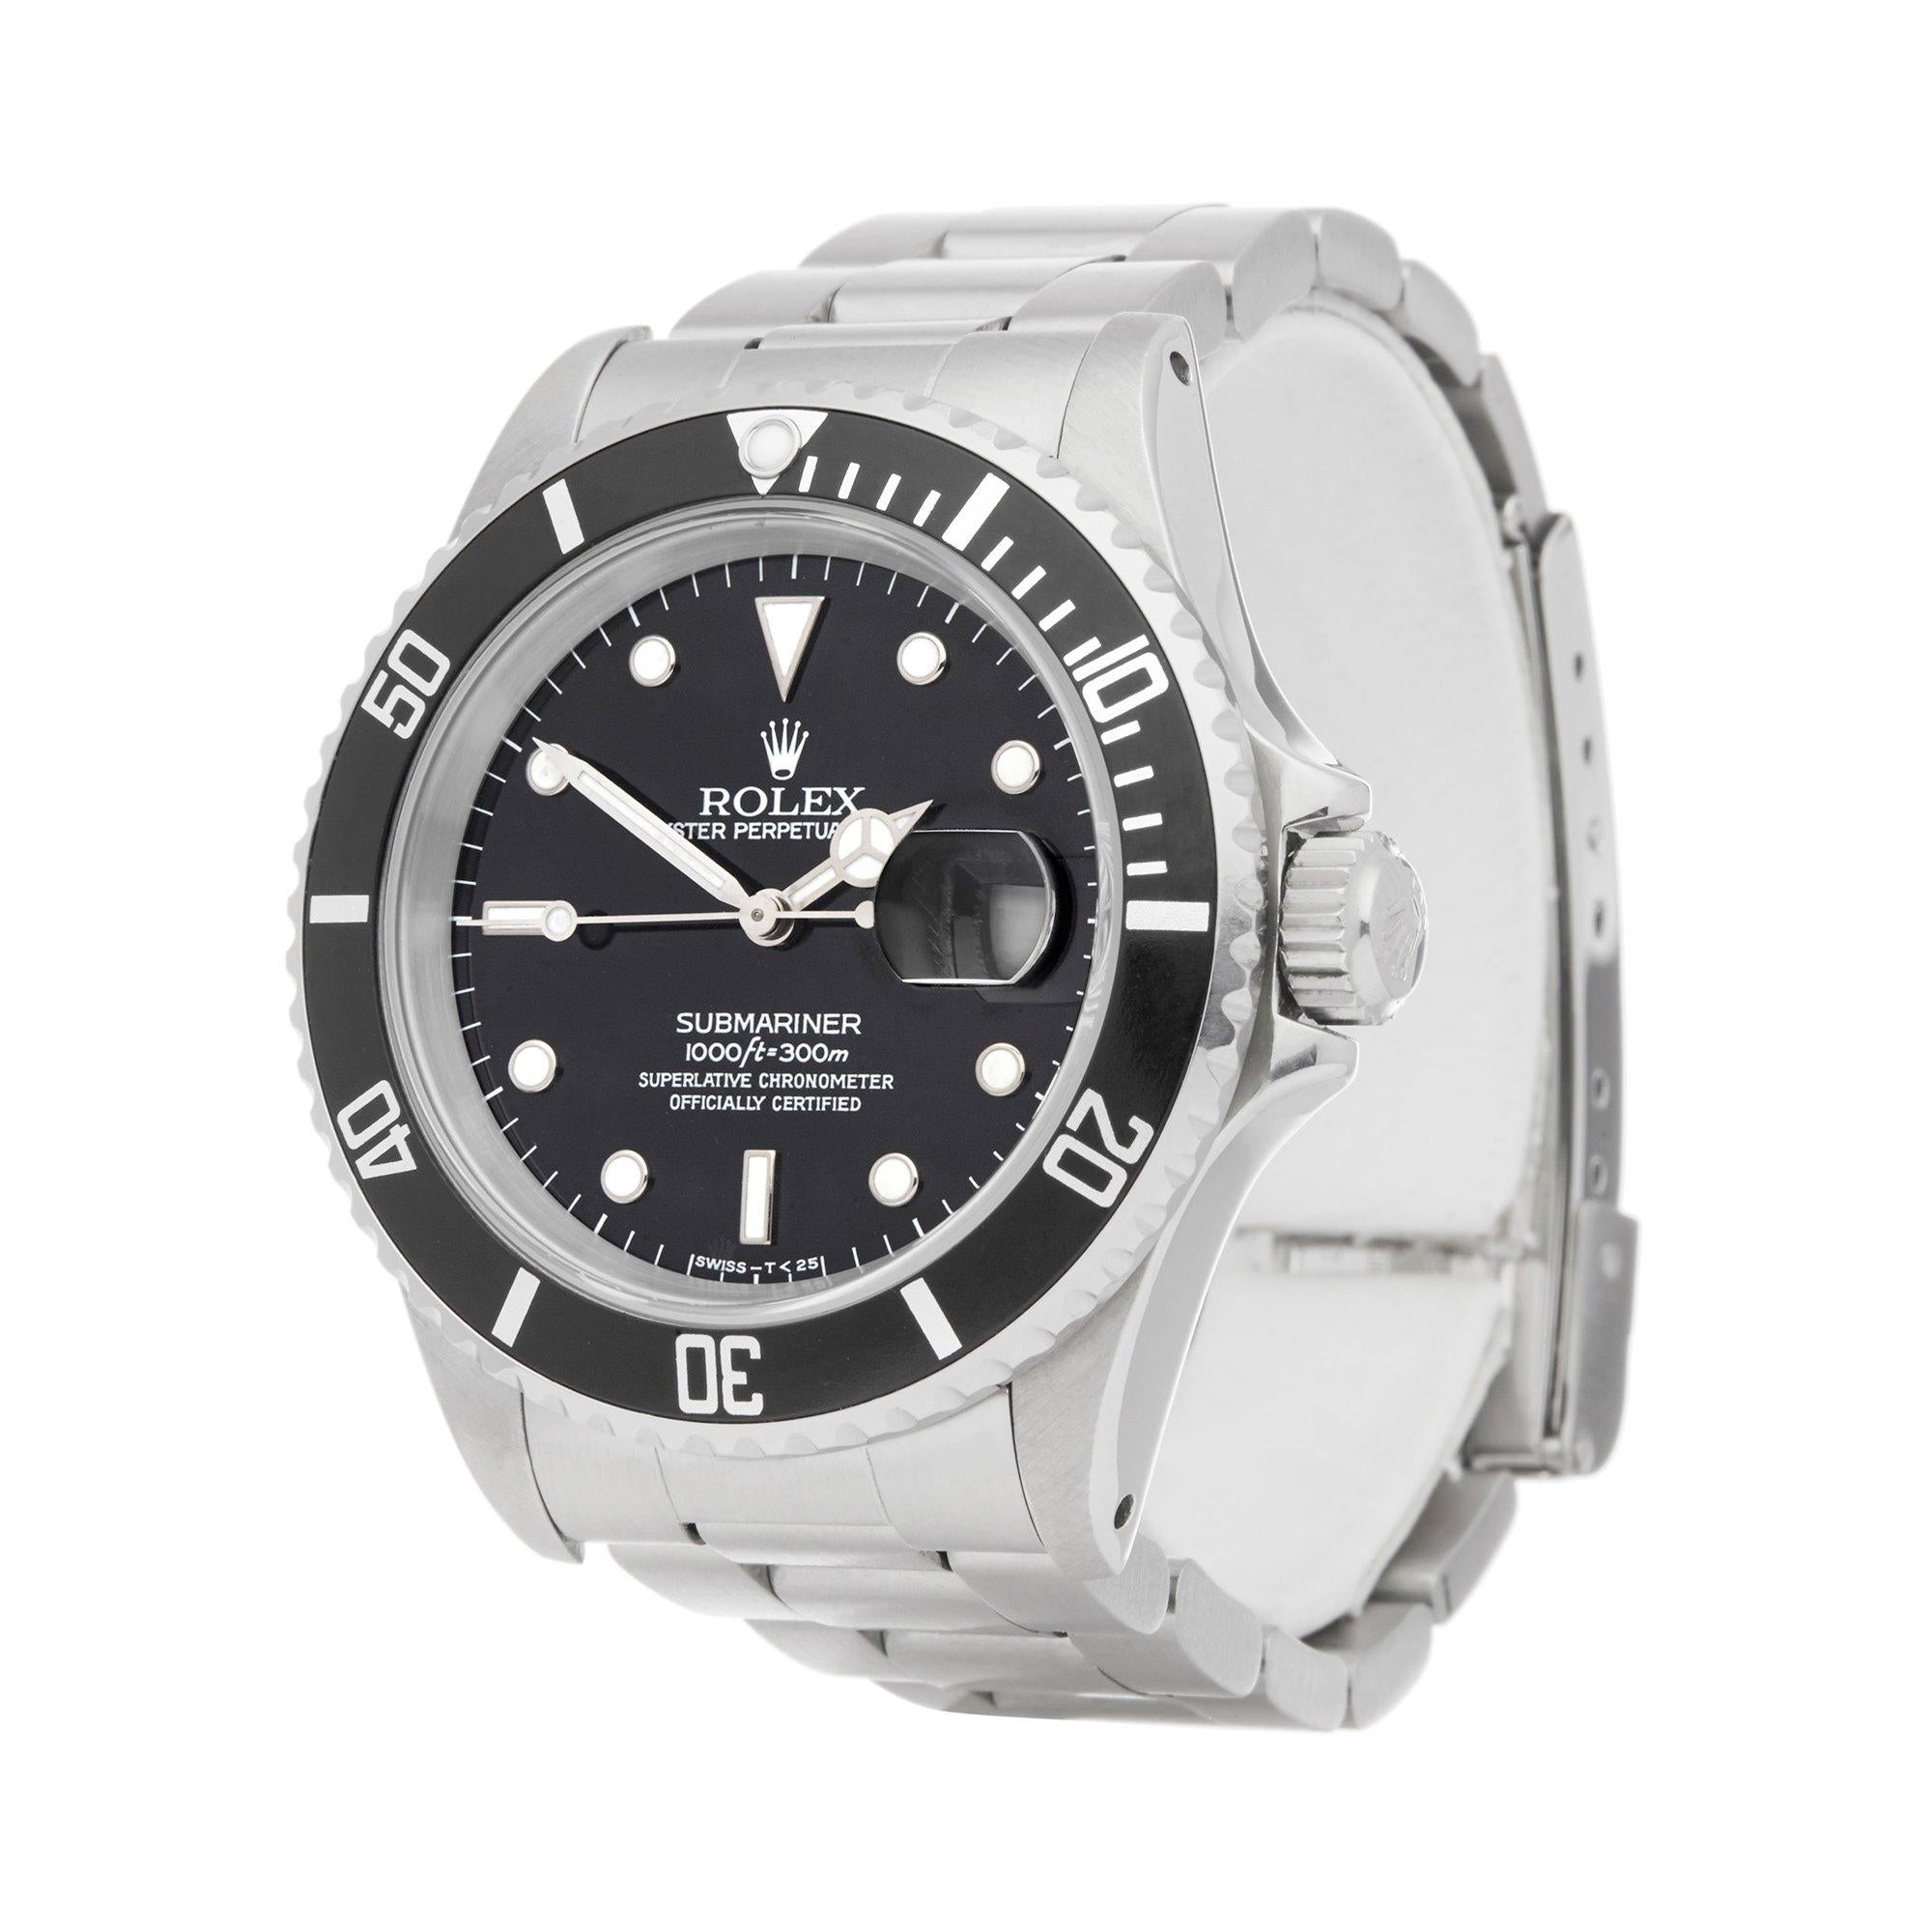 Xupes Reference: W007186
Manufacturer: Rolex
Model: Submariner
Model Variant: Date
Model Number: 16610
Age: 1991
Gender: Men
Complete With: Rolex Box 
Dial: Black Other
Glass: Sapphire Crystal
Case Size: 40mm
Case Material: Stainless Steel
Strap